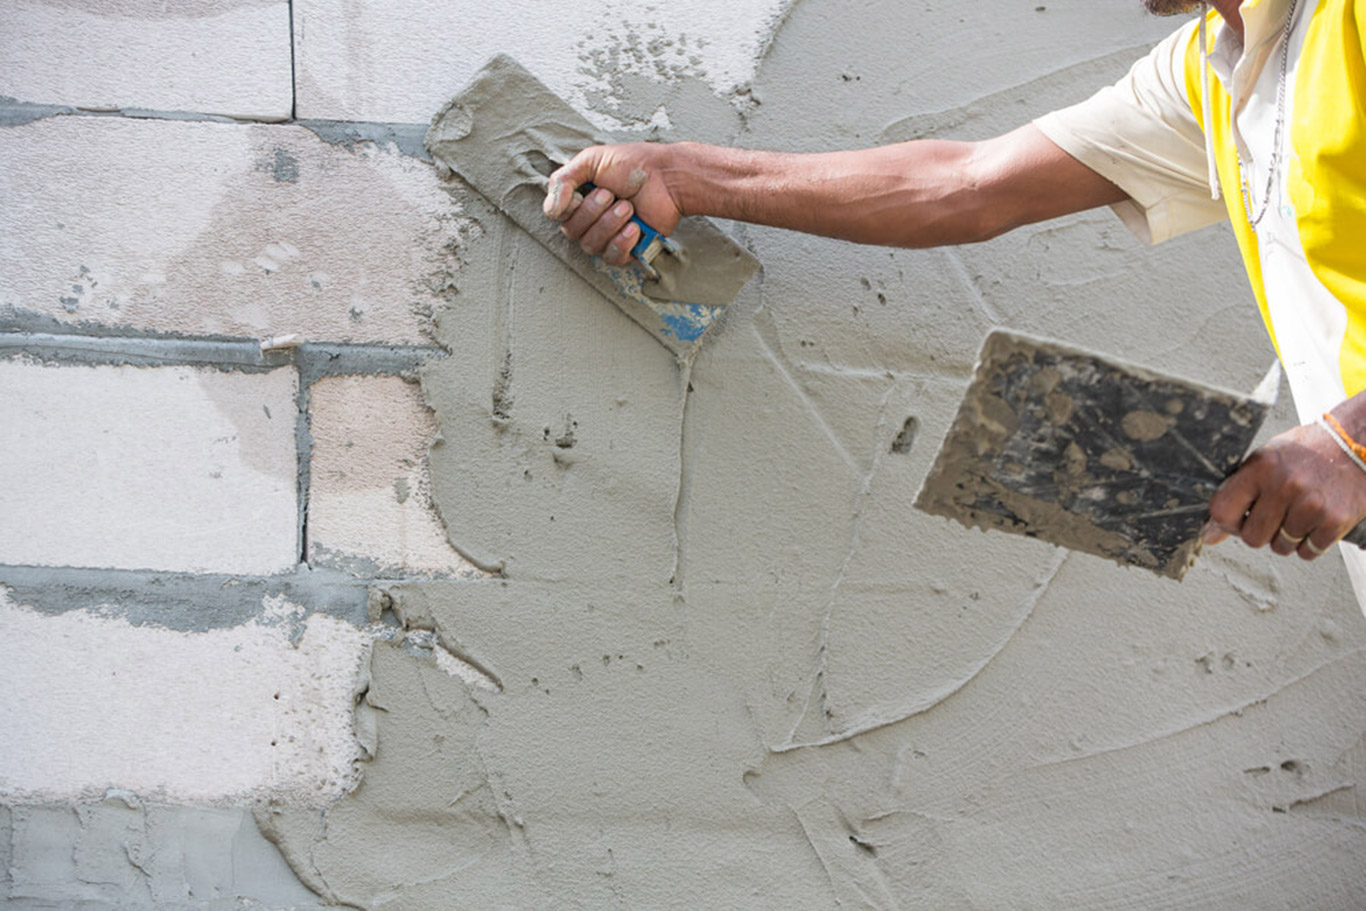 Plastering is used to cover and smoothen brick wall surfaces.